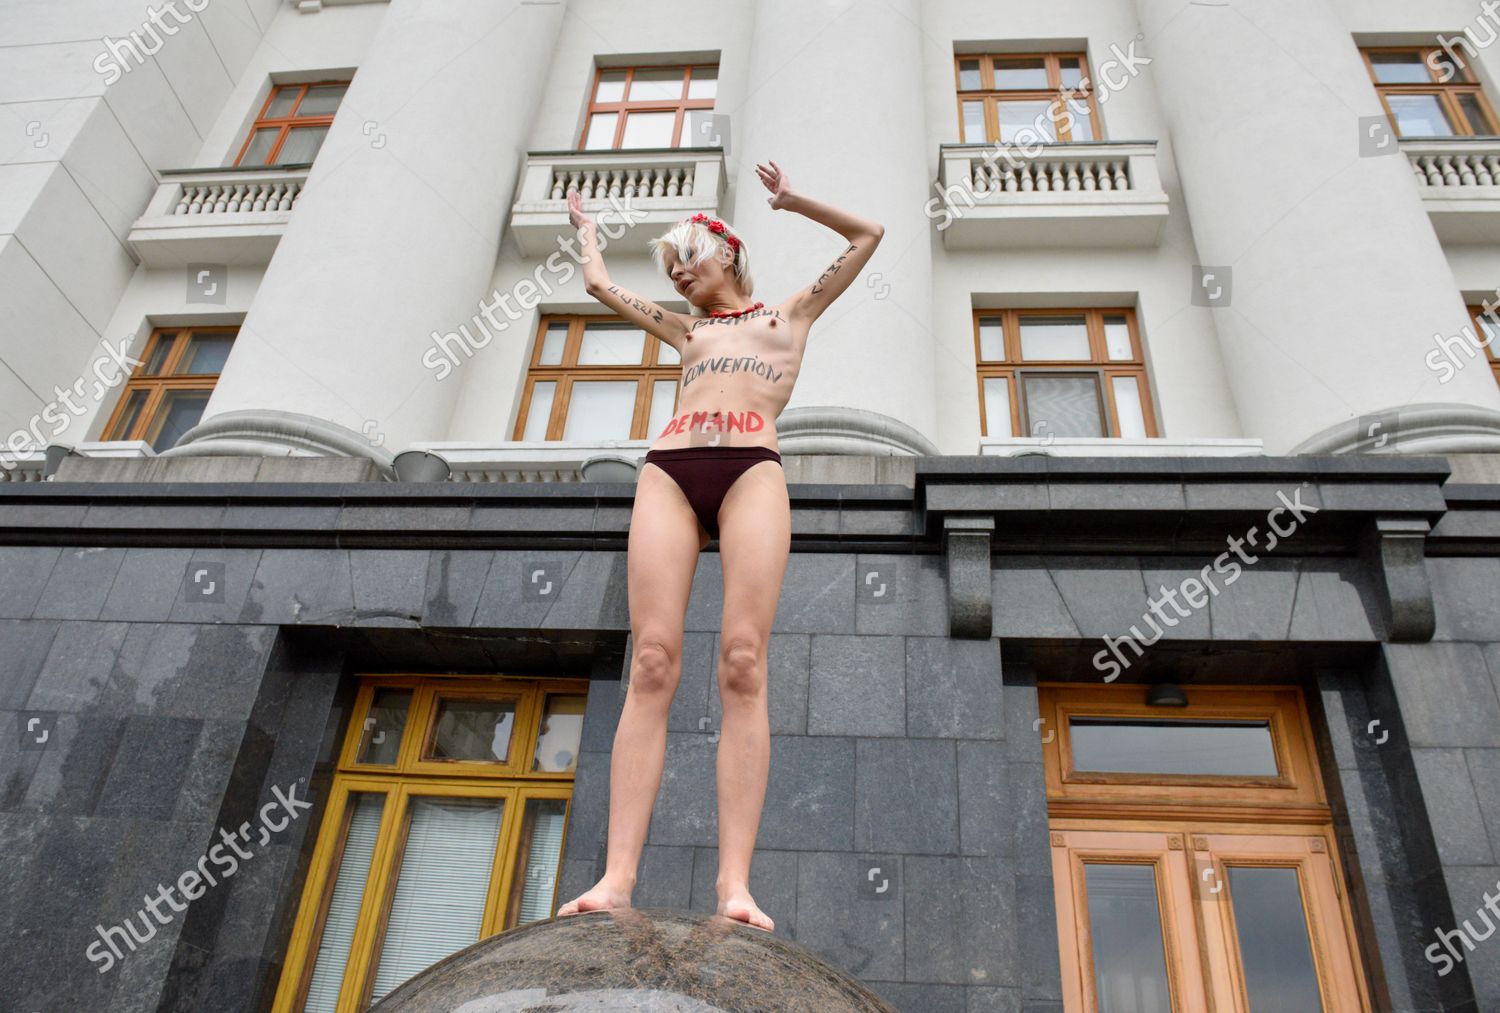 Editors Note Image Contains Nudity An Editorial Stock Photo Stock Image Shutterstock